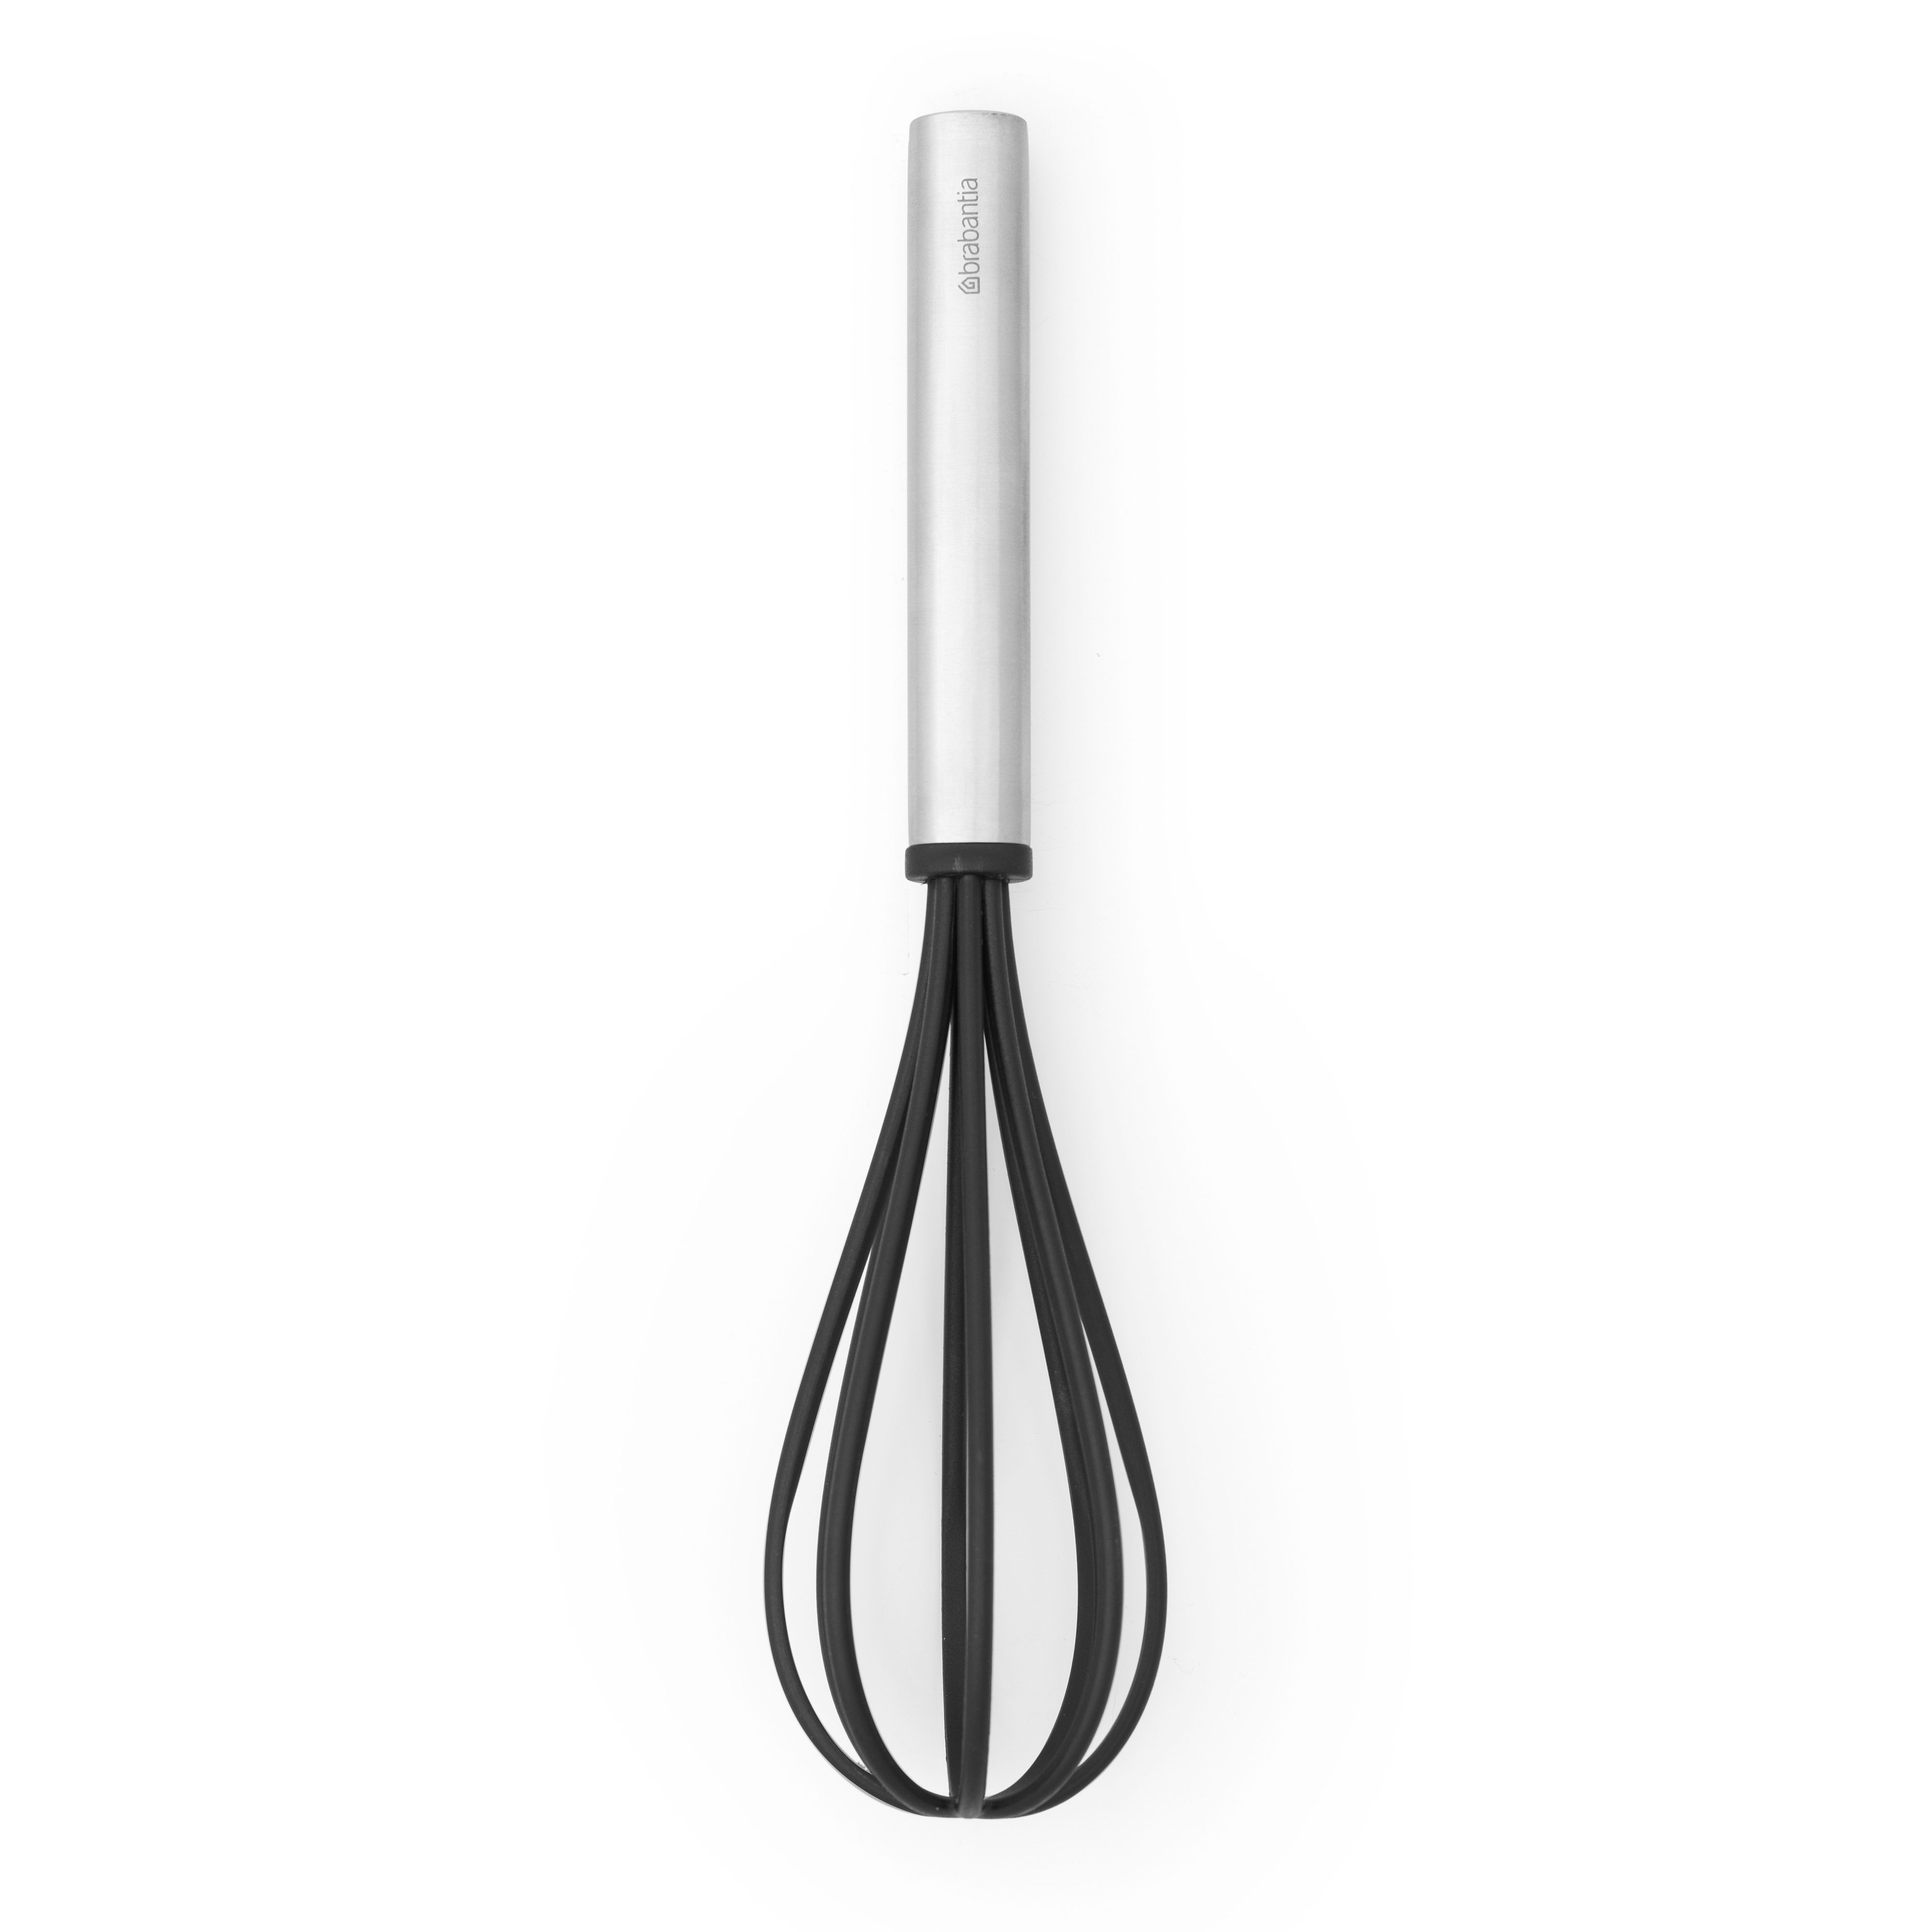 https://www.nordicnest.com/assets/blobs/brabantia-profile-whisk-large-non-stick-stainless-steel/44828-01-01-15594d81a5.jpg